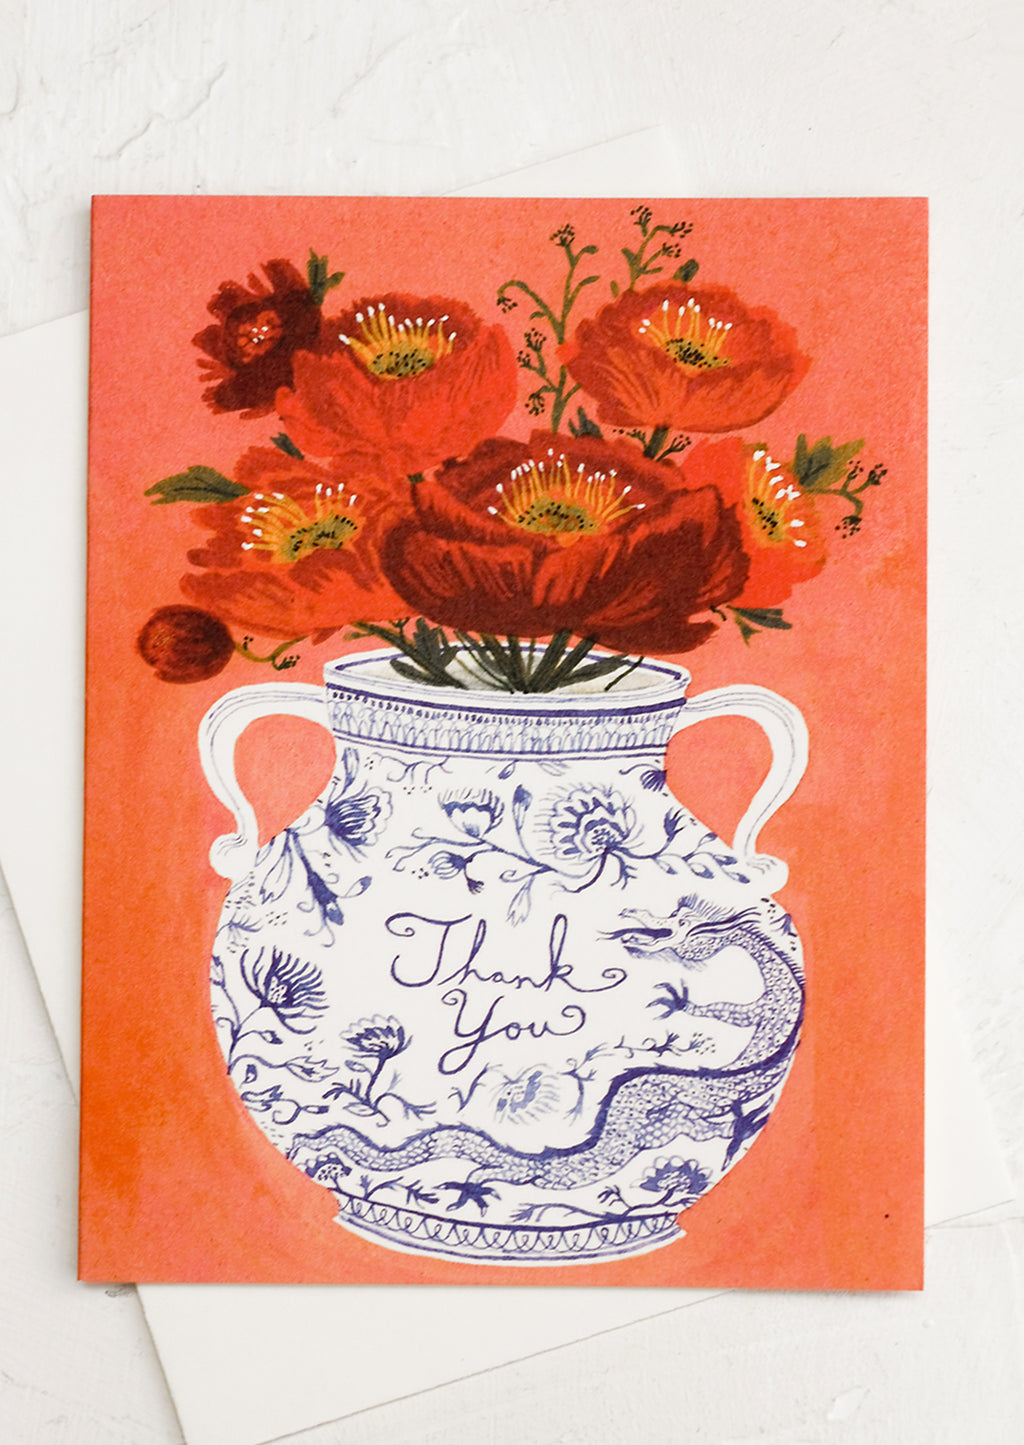 Single Card: Greeting card with chinoiserie vase holding flowers, text reads "Thank you".